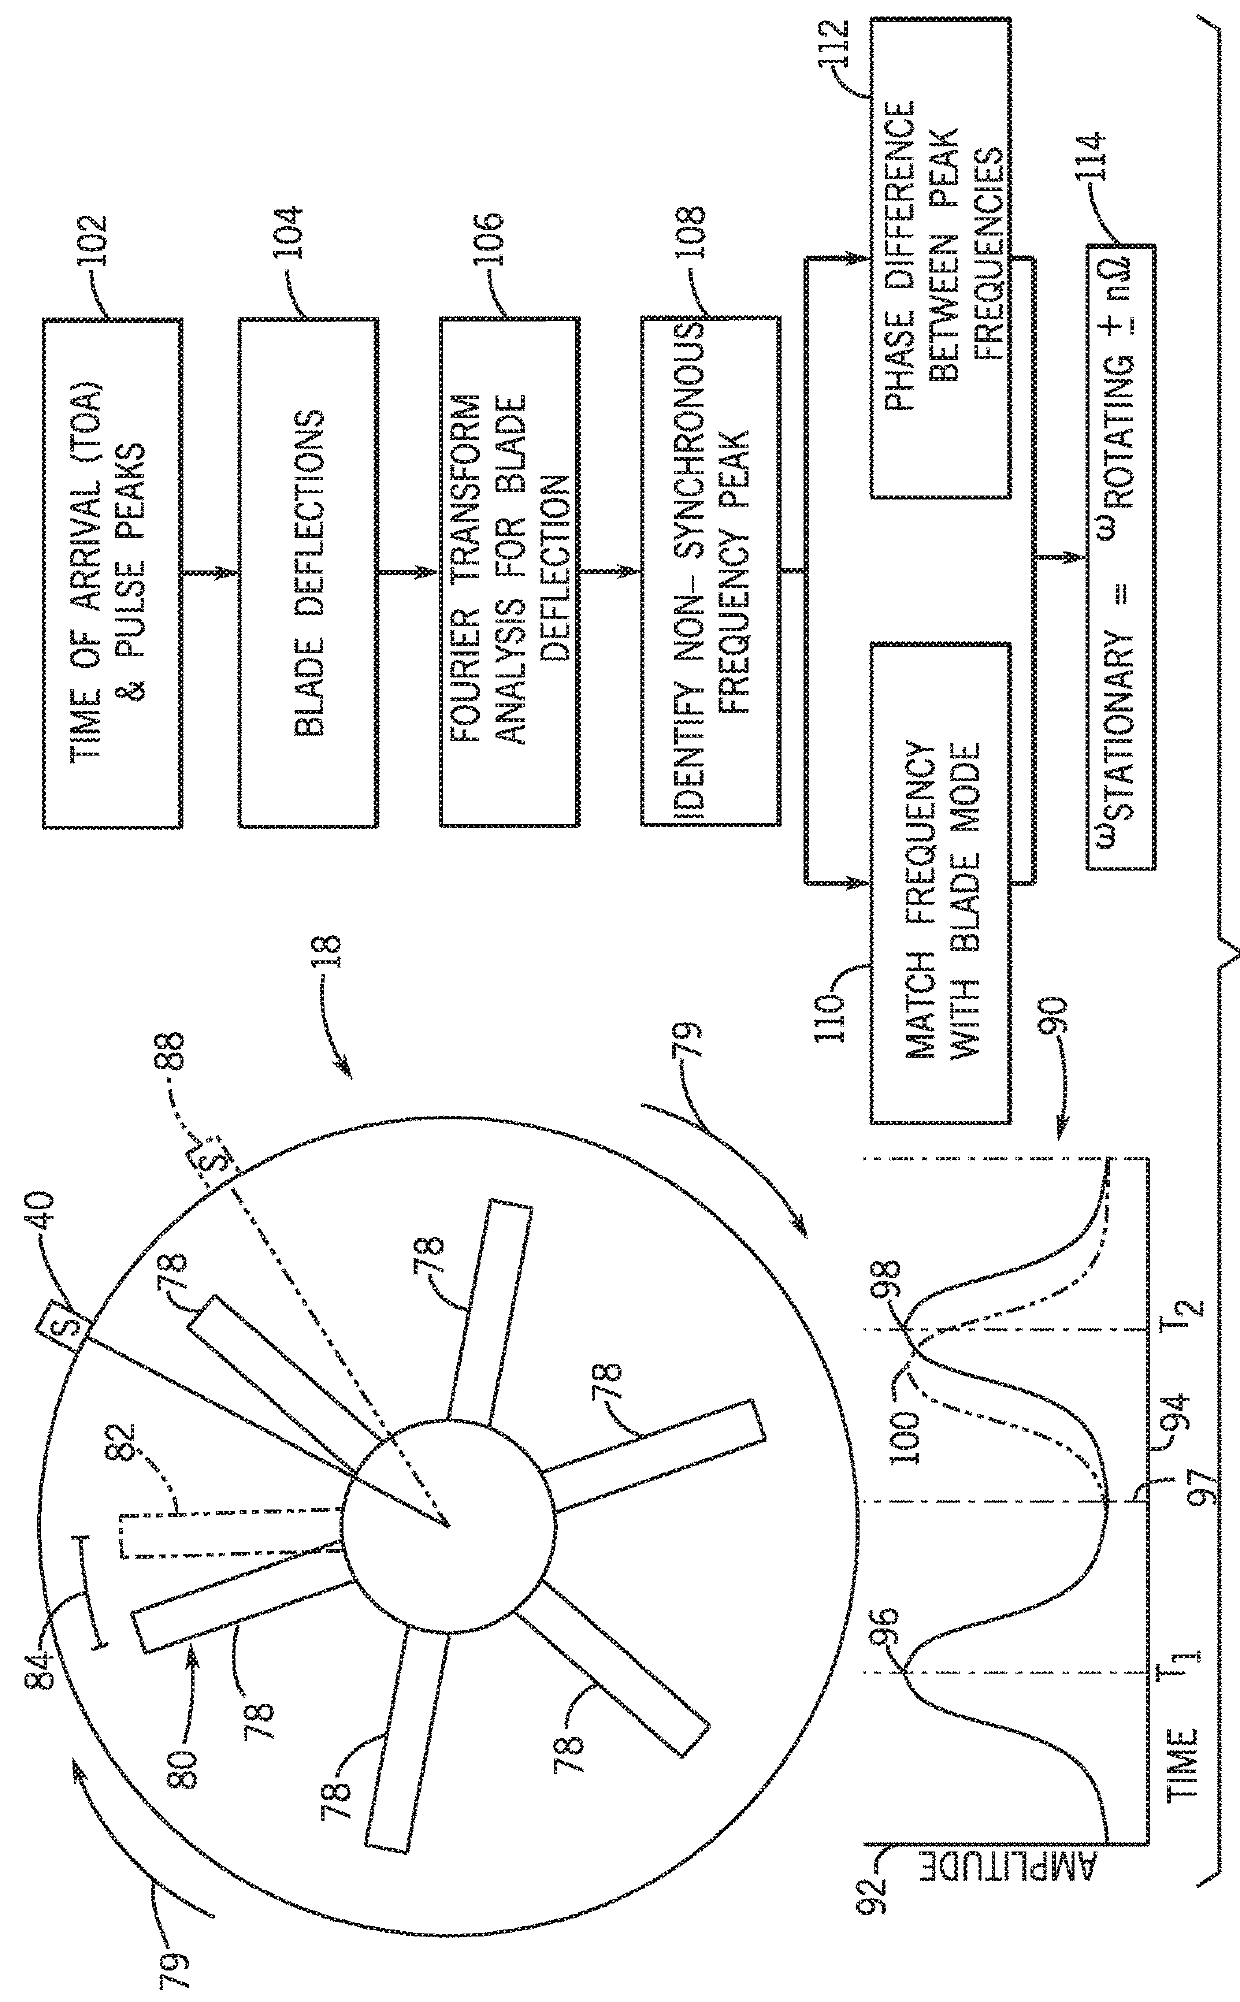 Gas turbine blade flutter monitoring and control system